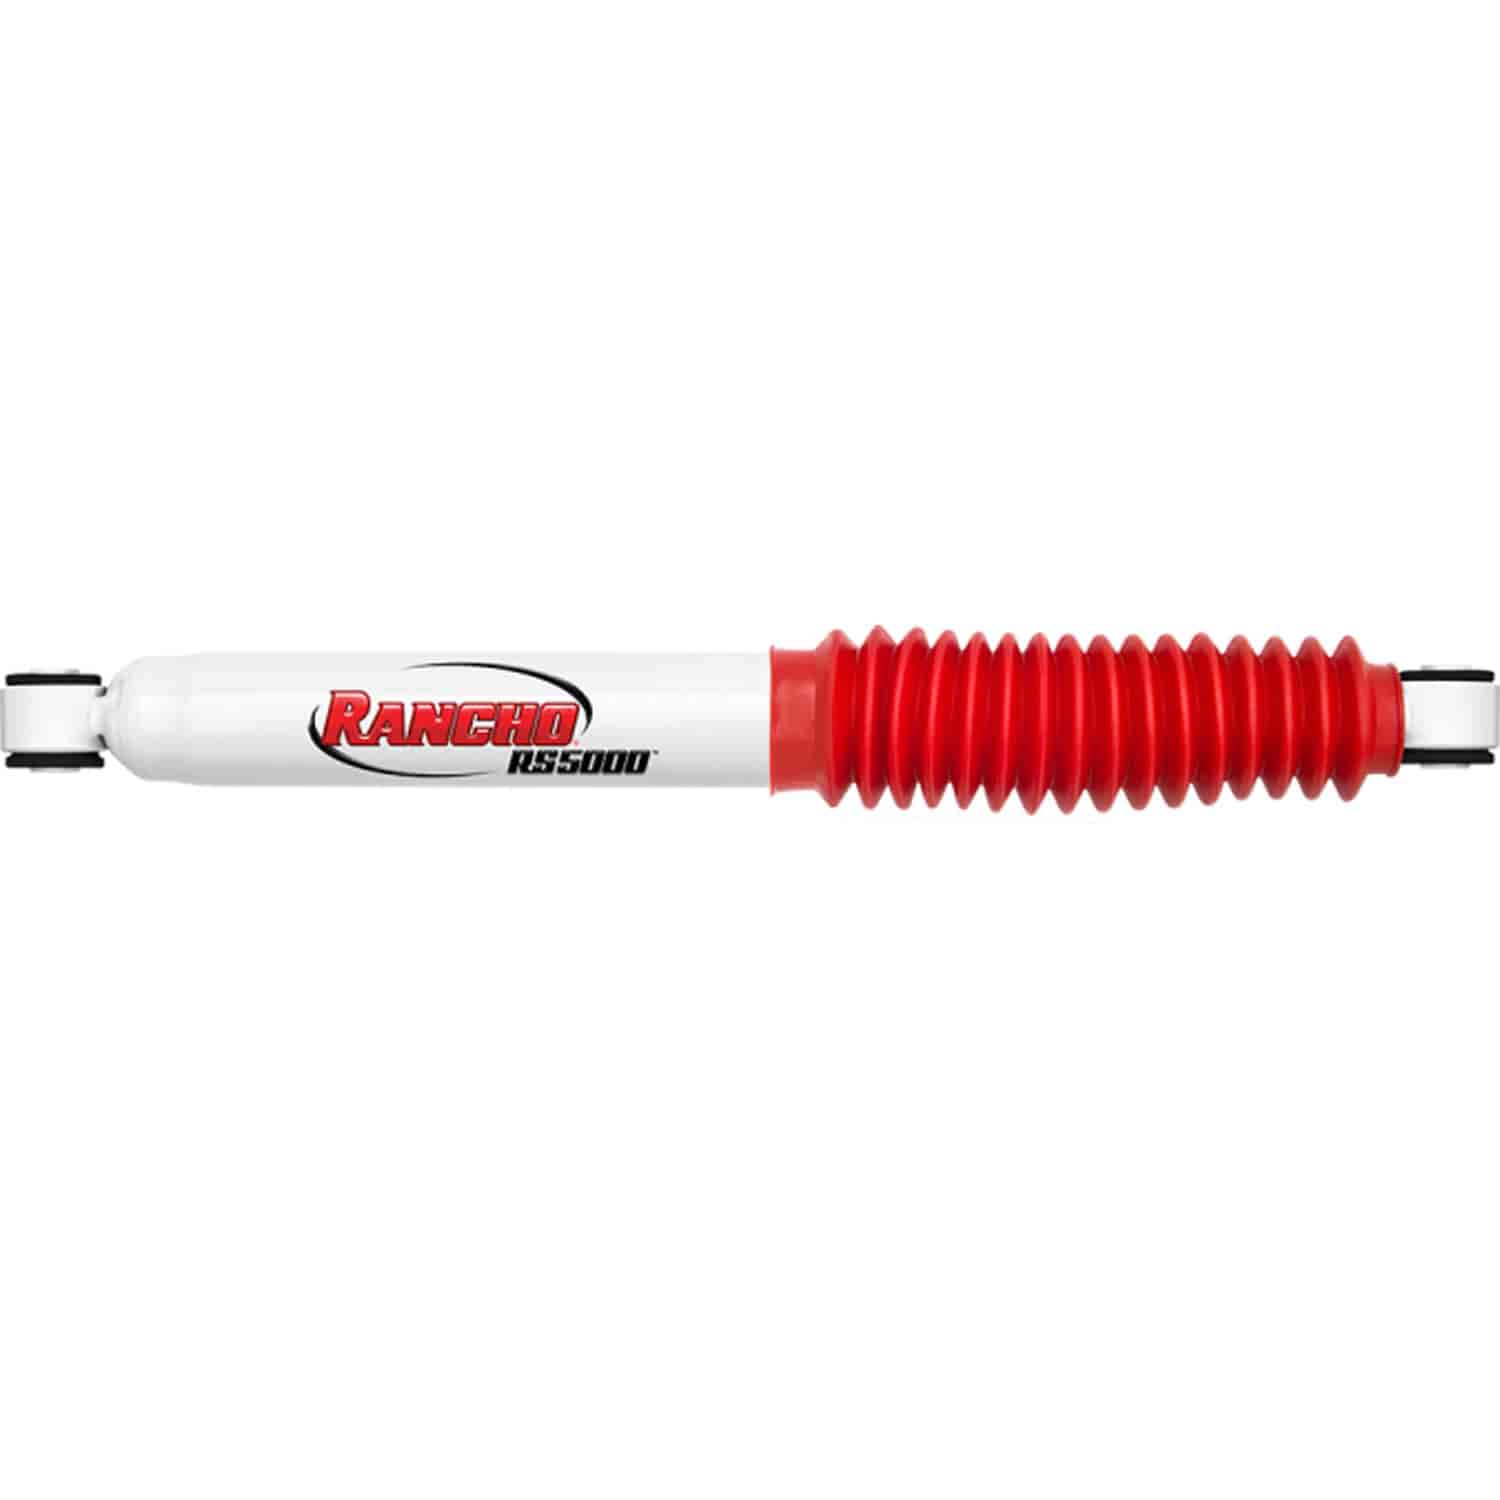 RS5000 Rear Shock Absorber Fits for Nissan Titan